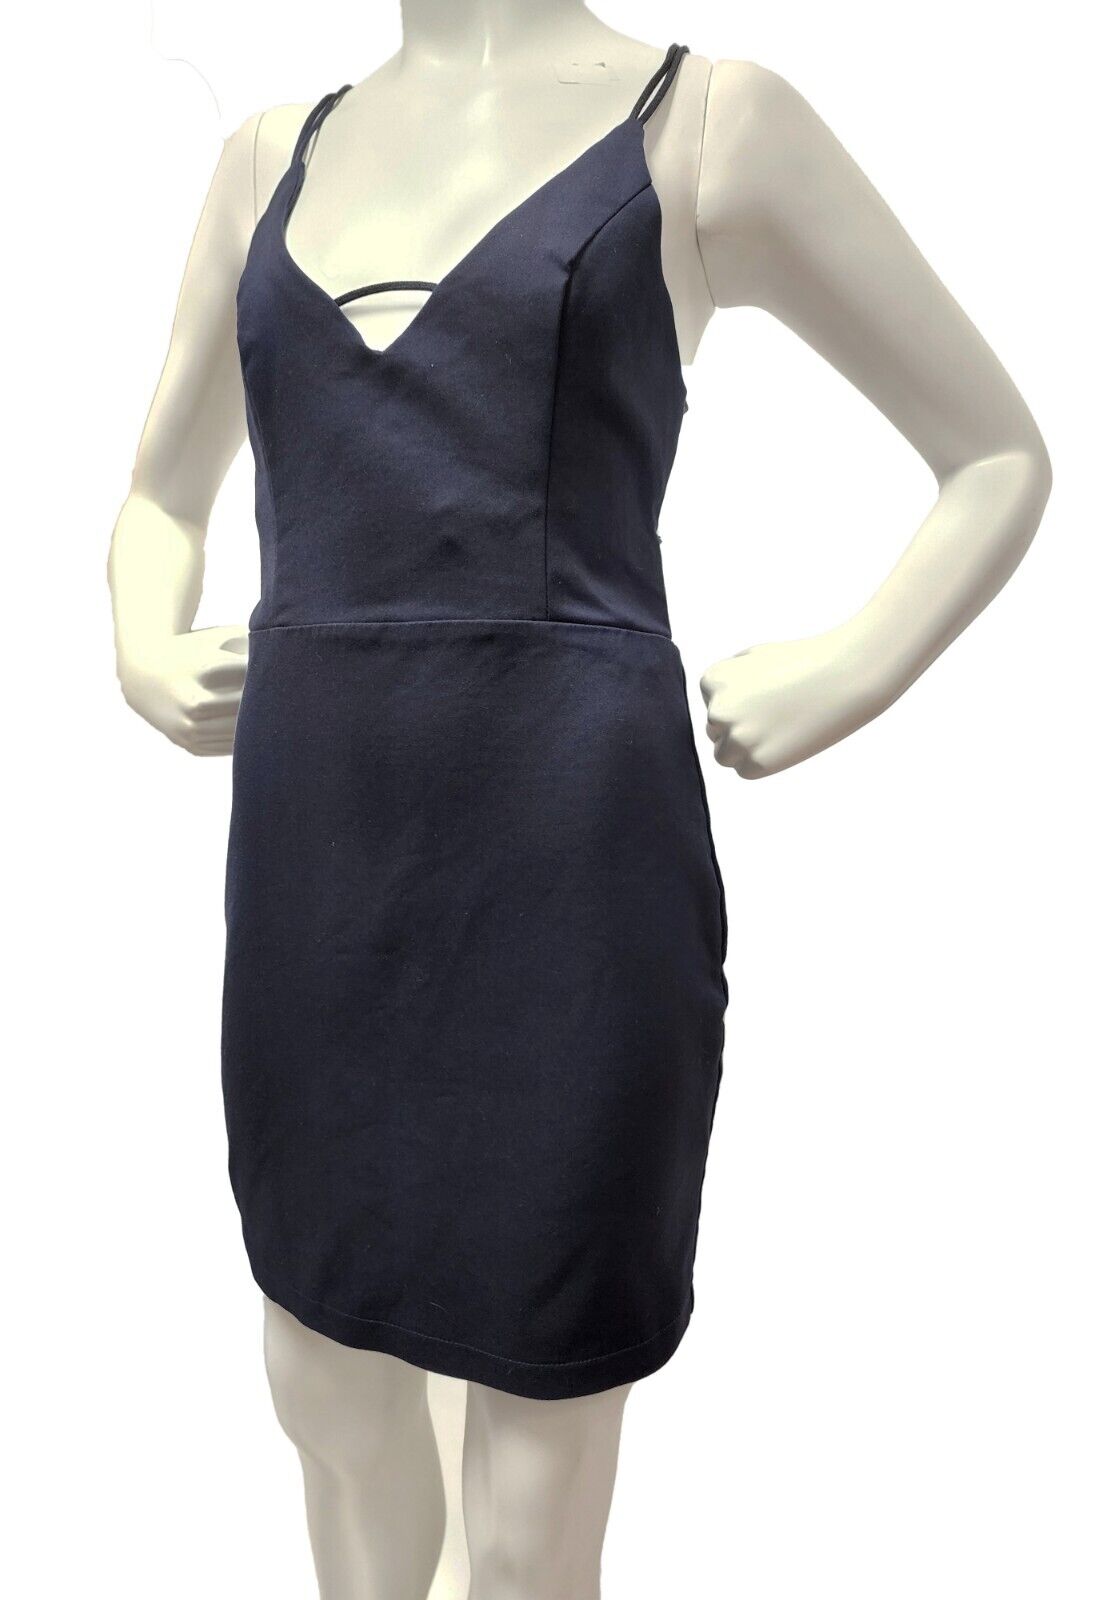 superdown Grecia Strappy Back Dress in Navy - size S - DYED